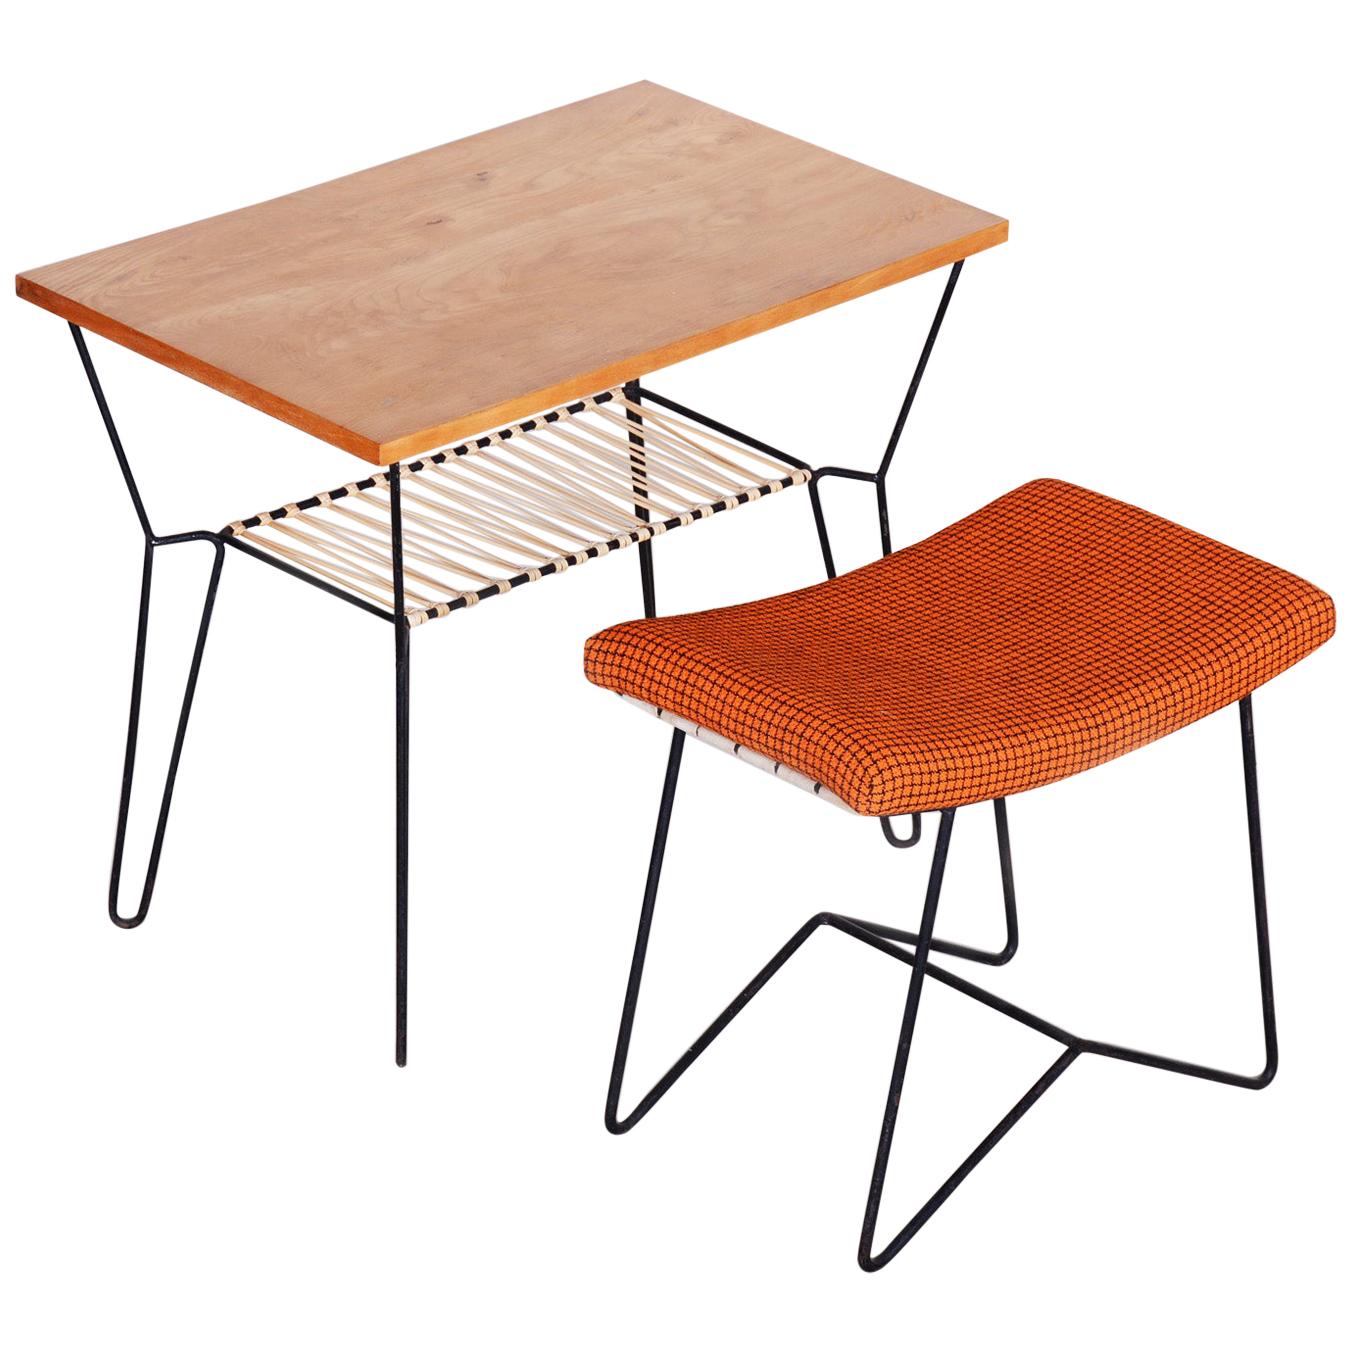 Set of Midcentury Orange Stool and Beech Table, Preserved Condition, 1950s